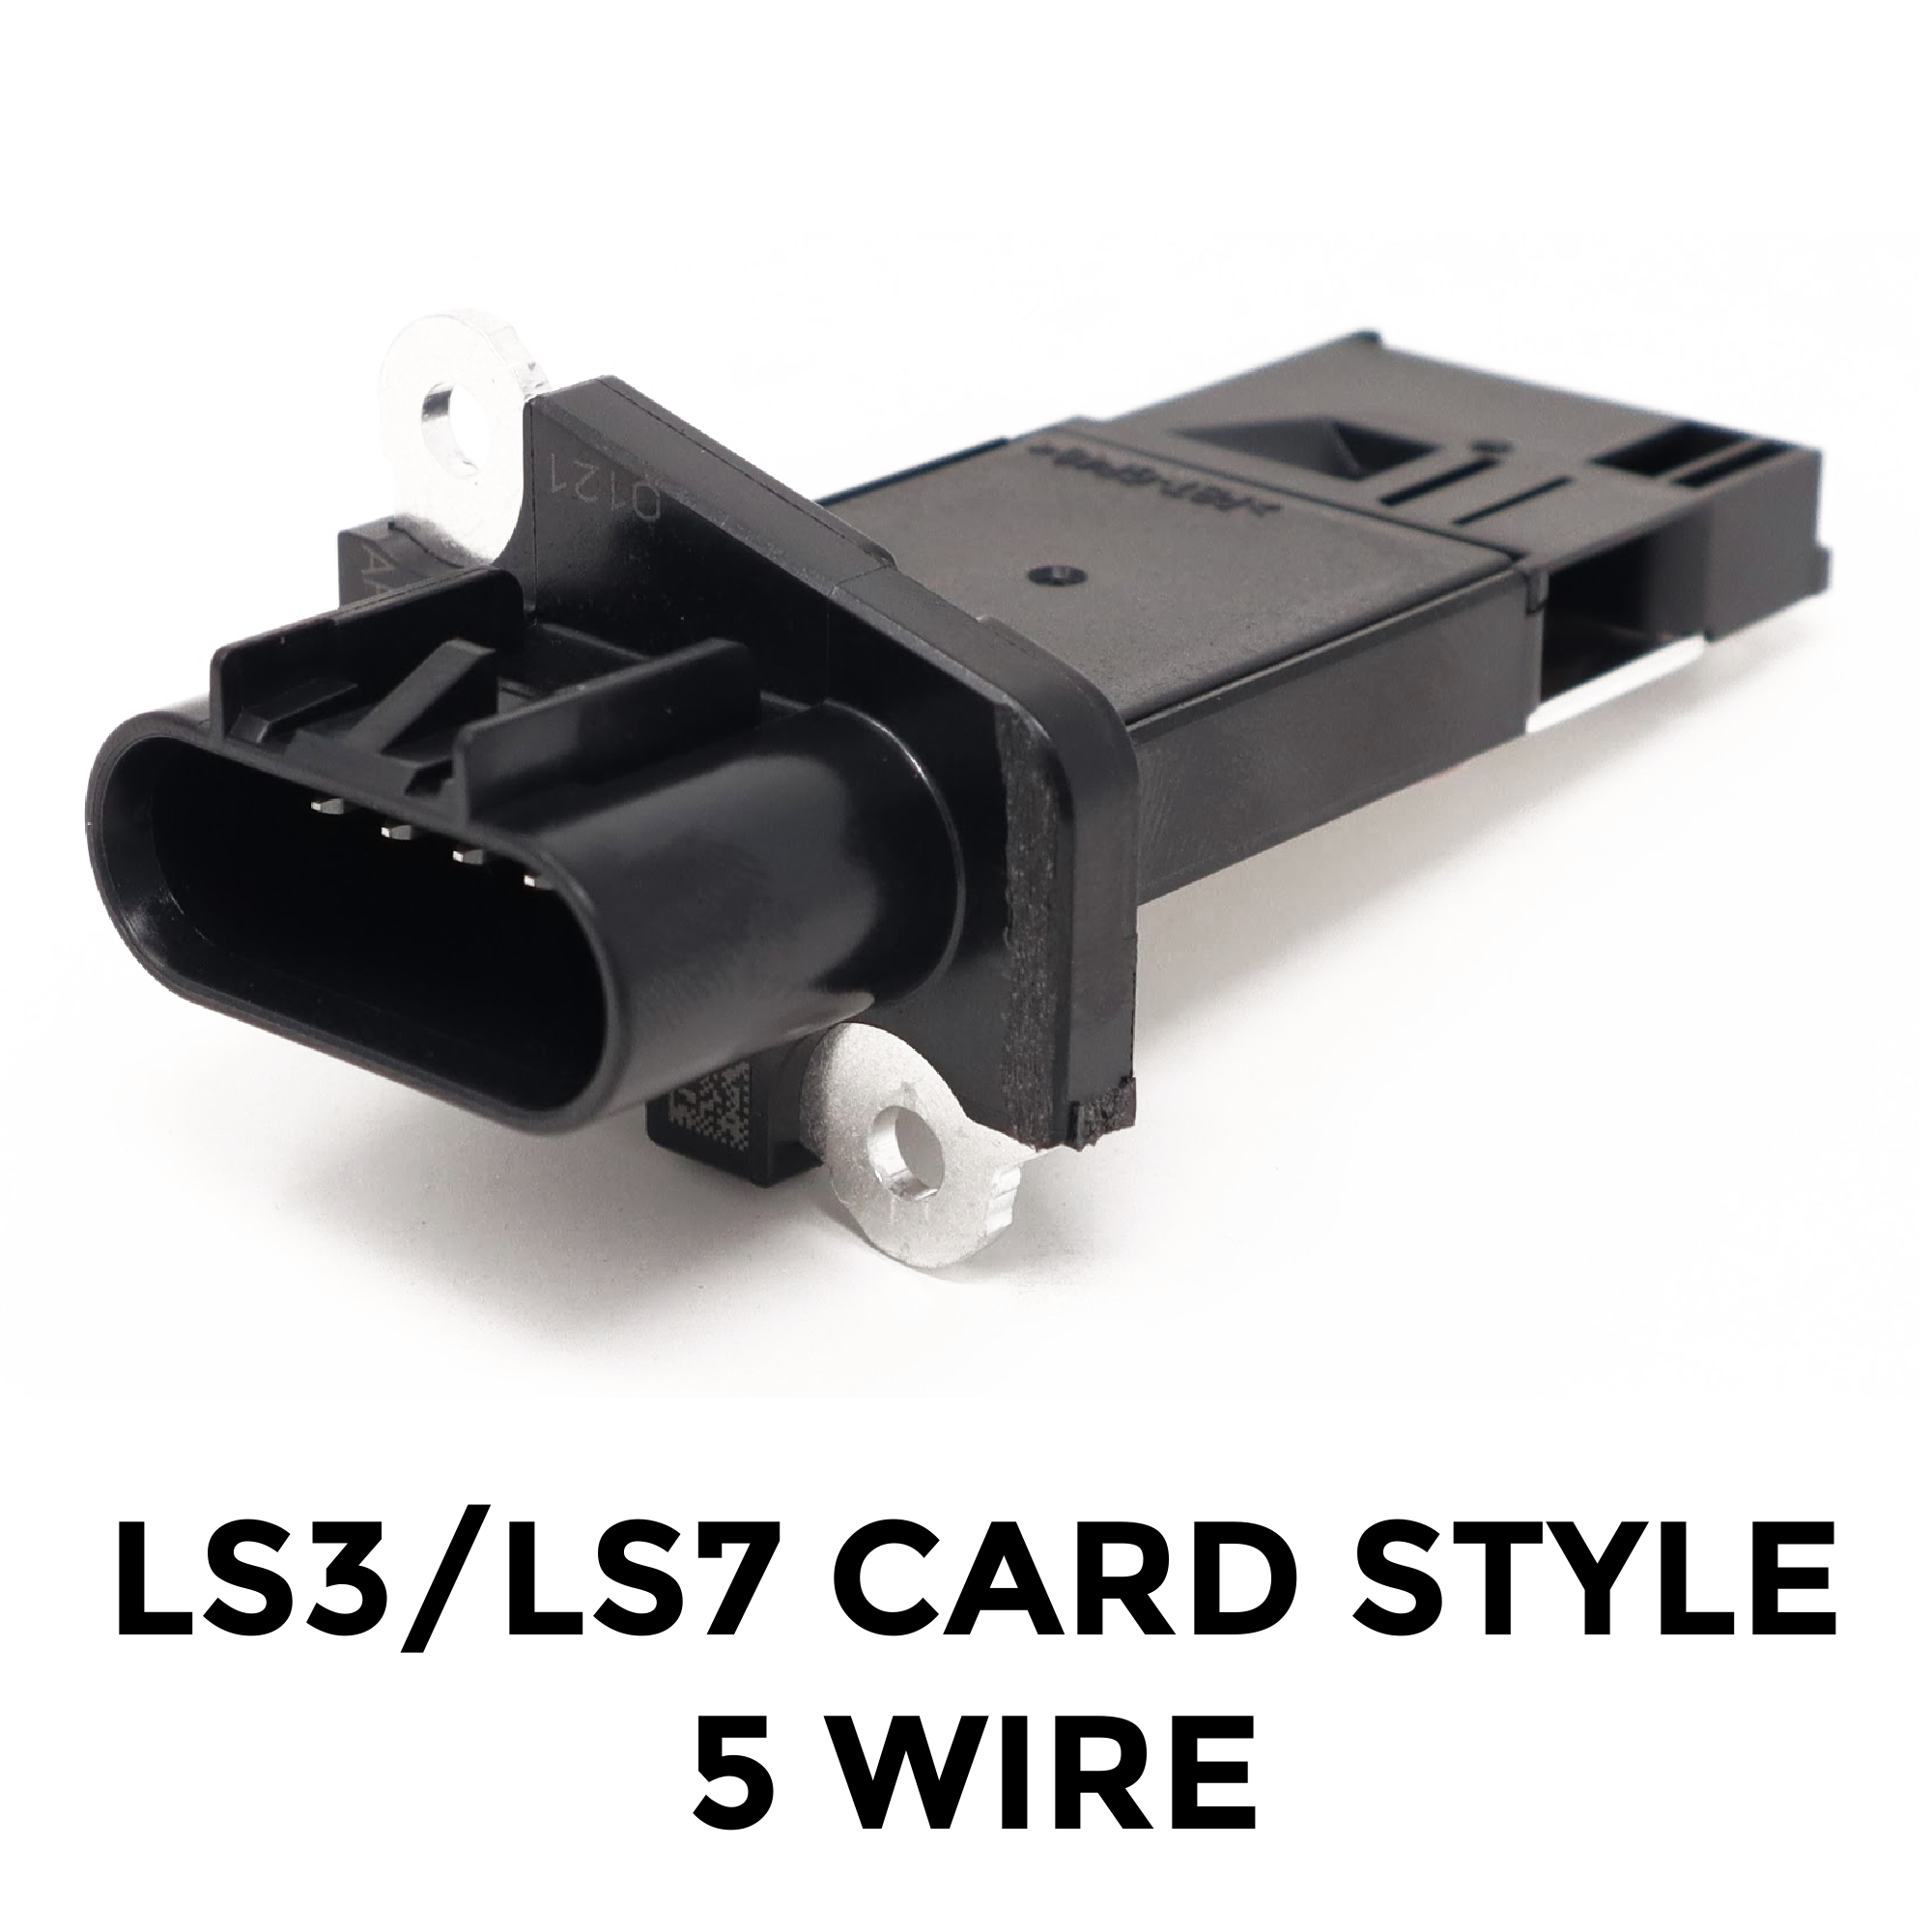 LS3 Card Style 5 Wire $0.00